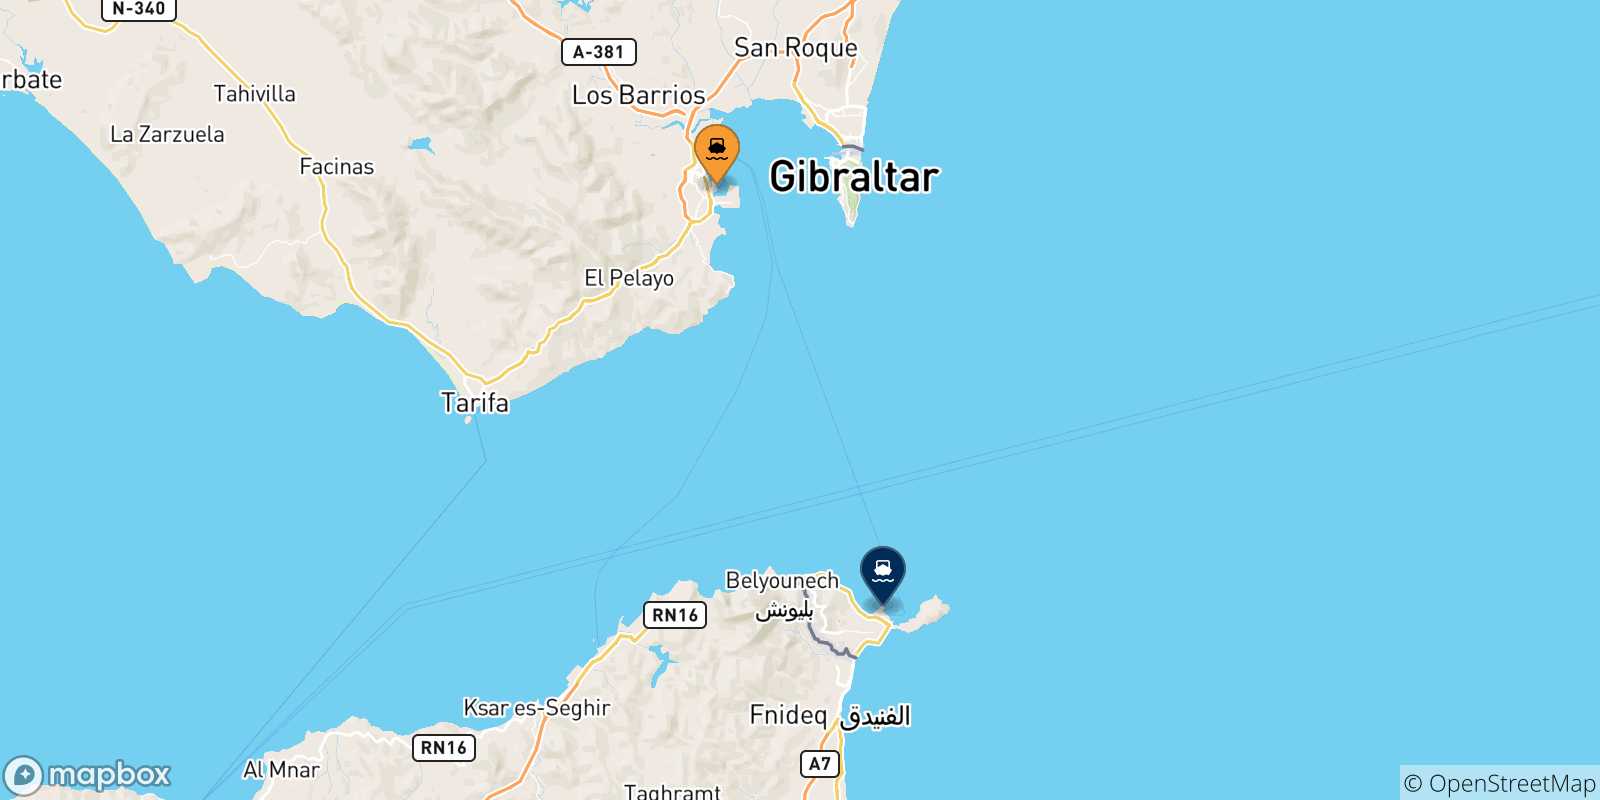 Map of the possible routes between Spain and Ceuta